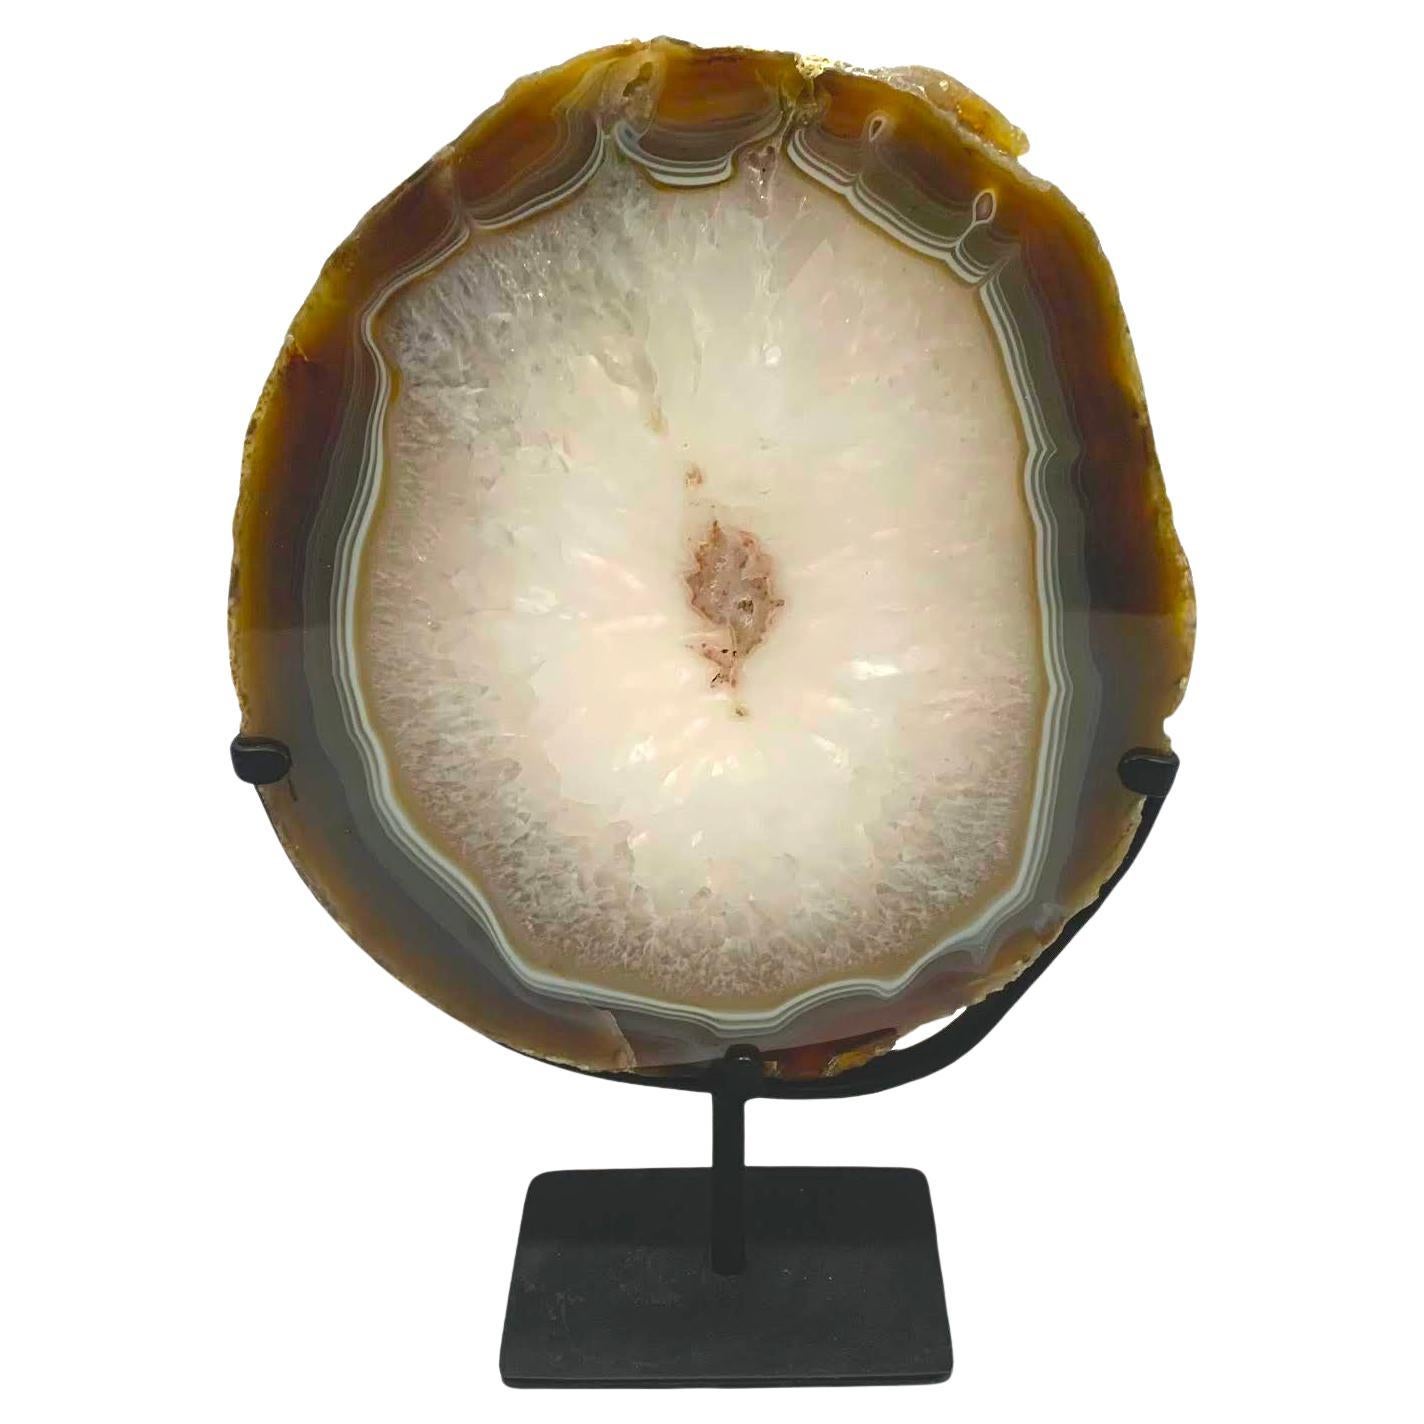 Prehistoric Brazilian thick agate geode on stand.
White center with brown border.
Metal stand measures 5